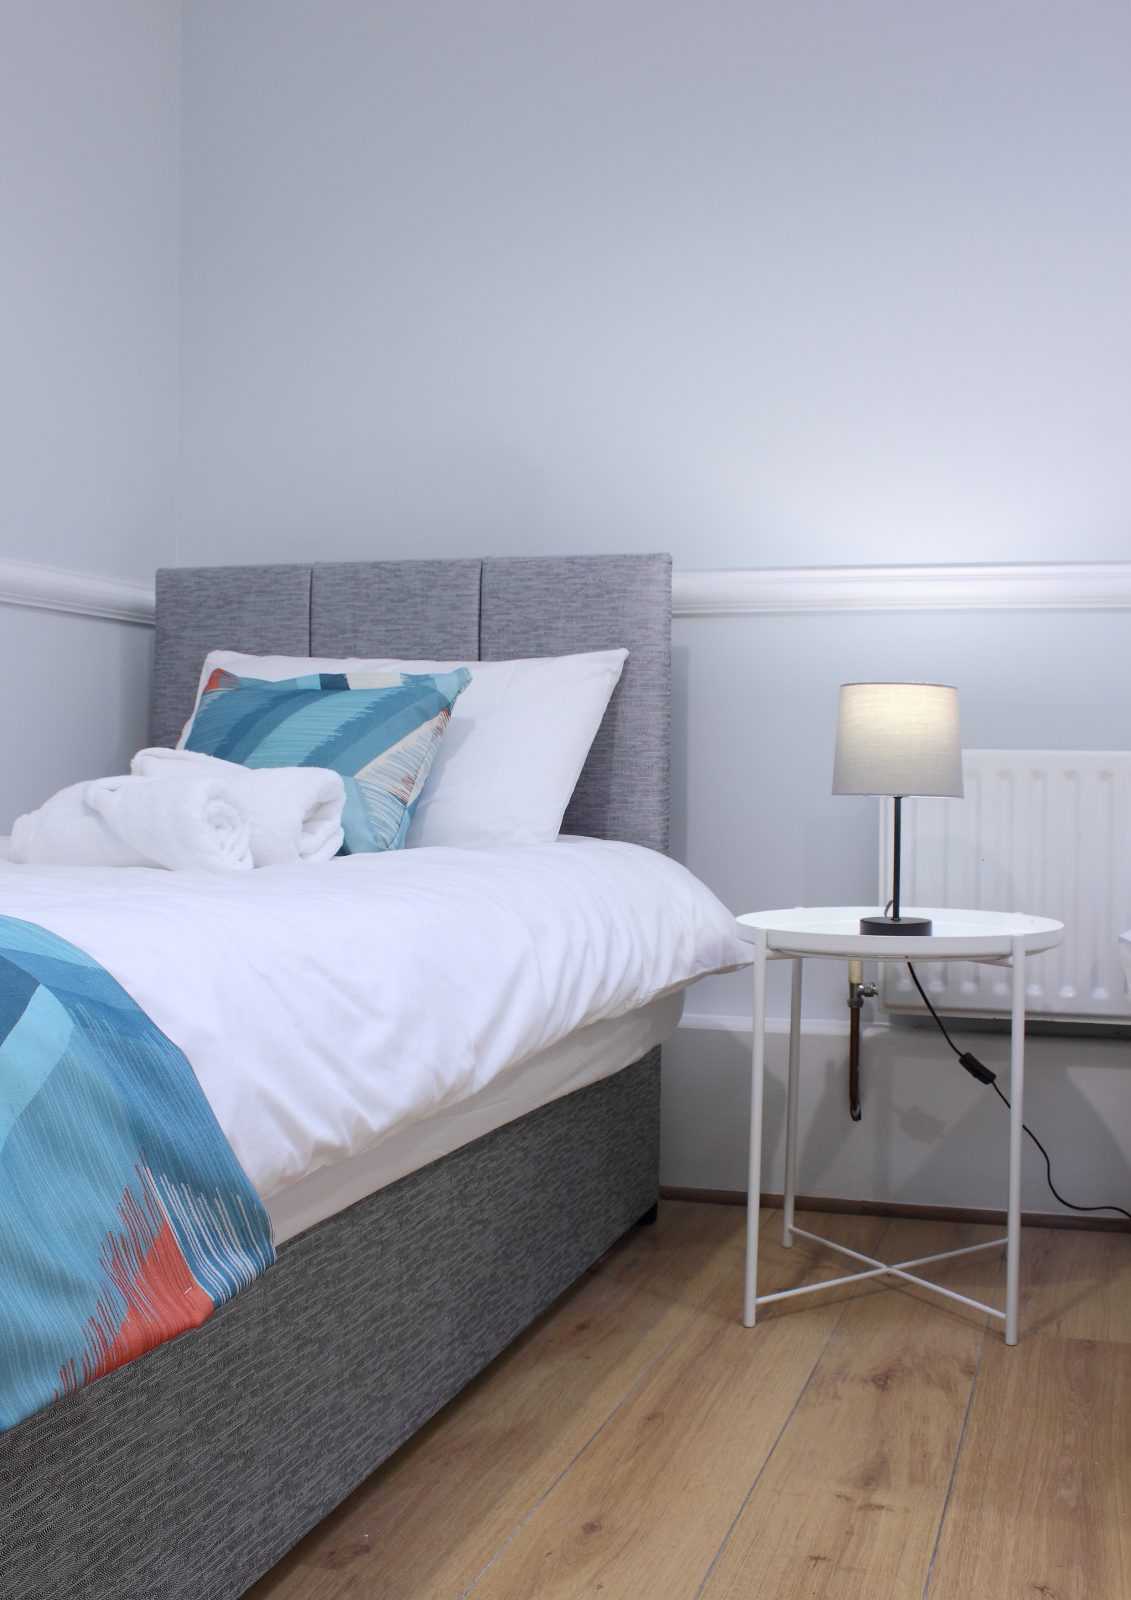 McQuaid Apartment Suite - Self-Catering Accommodations in Dungannon, Northern Ireland